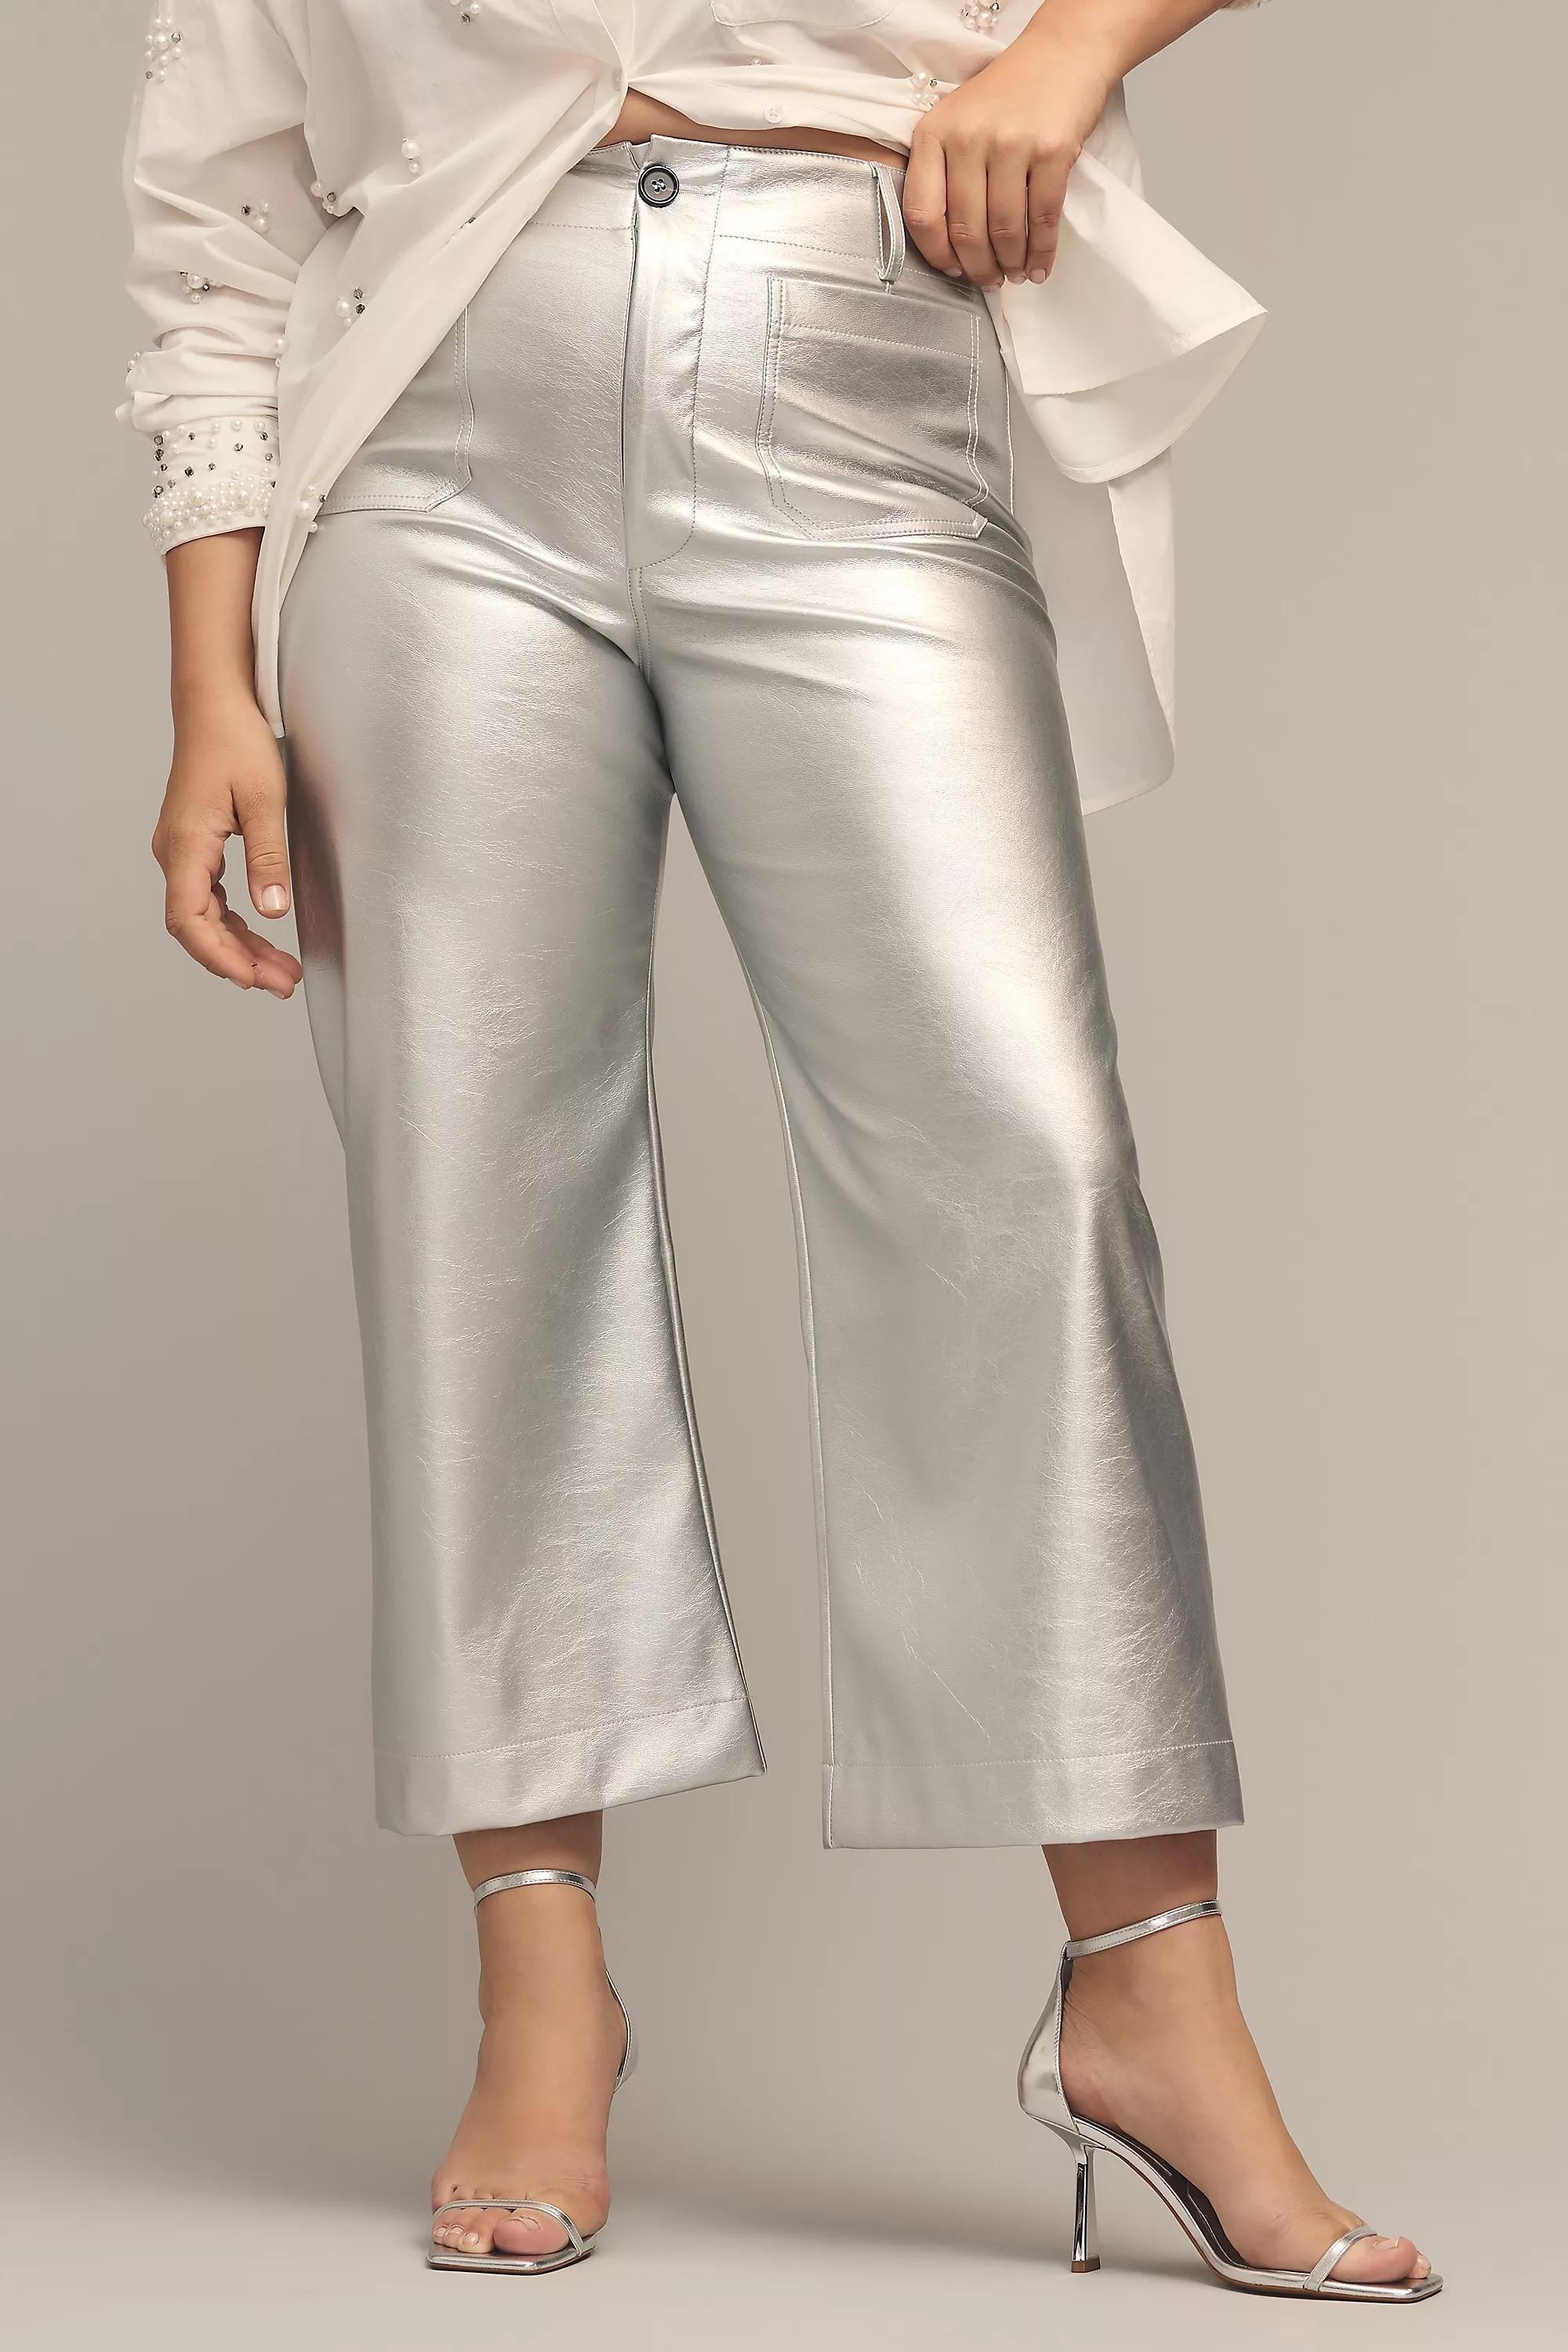 Anthropologie - Maeve Cropped Wide-Leg Faux Leather Pants, Silver